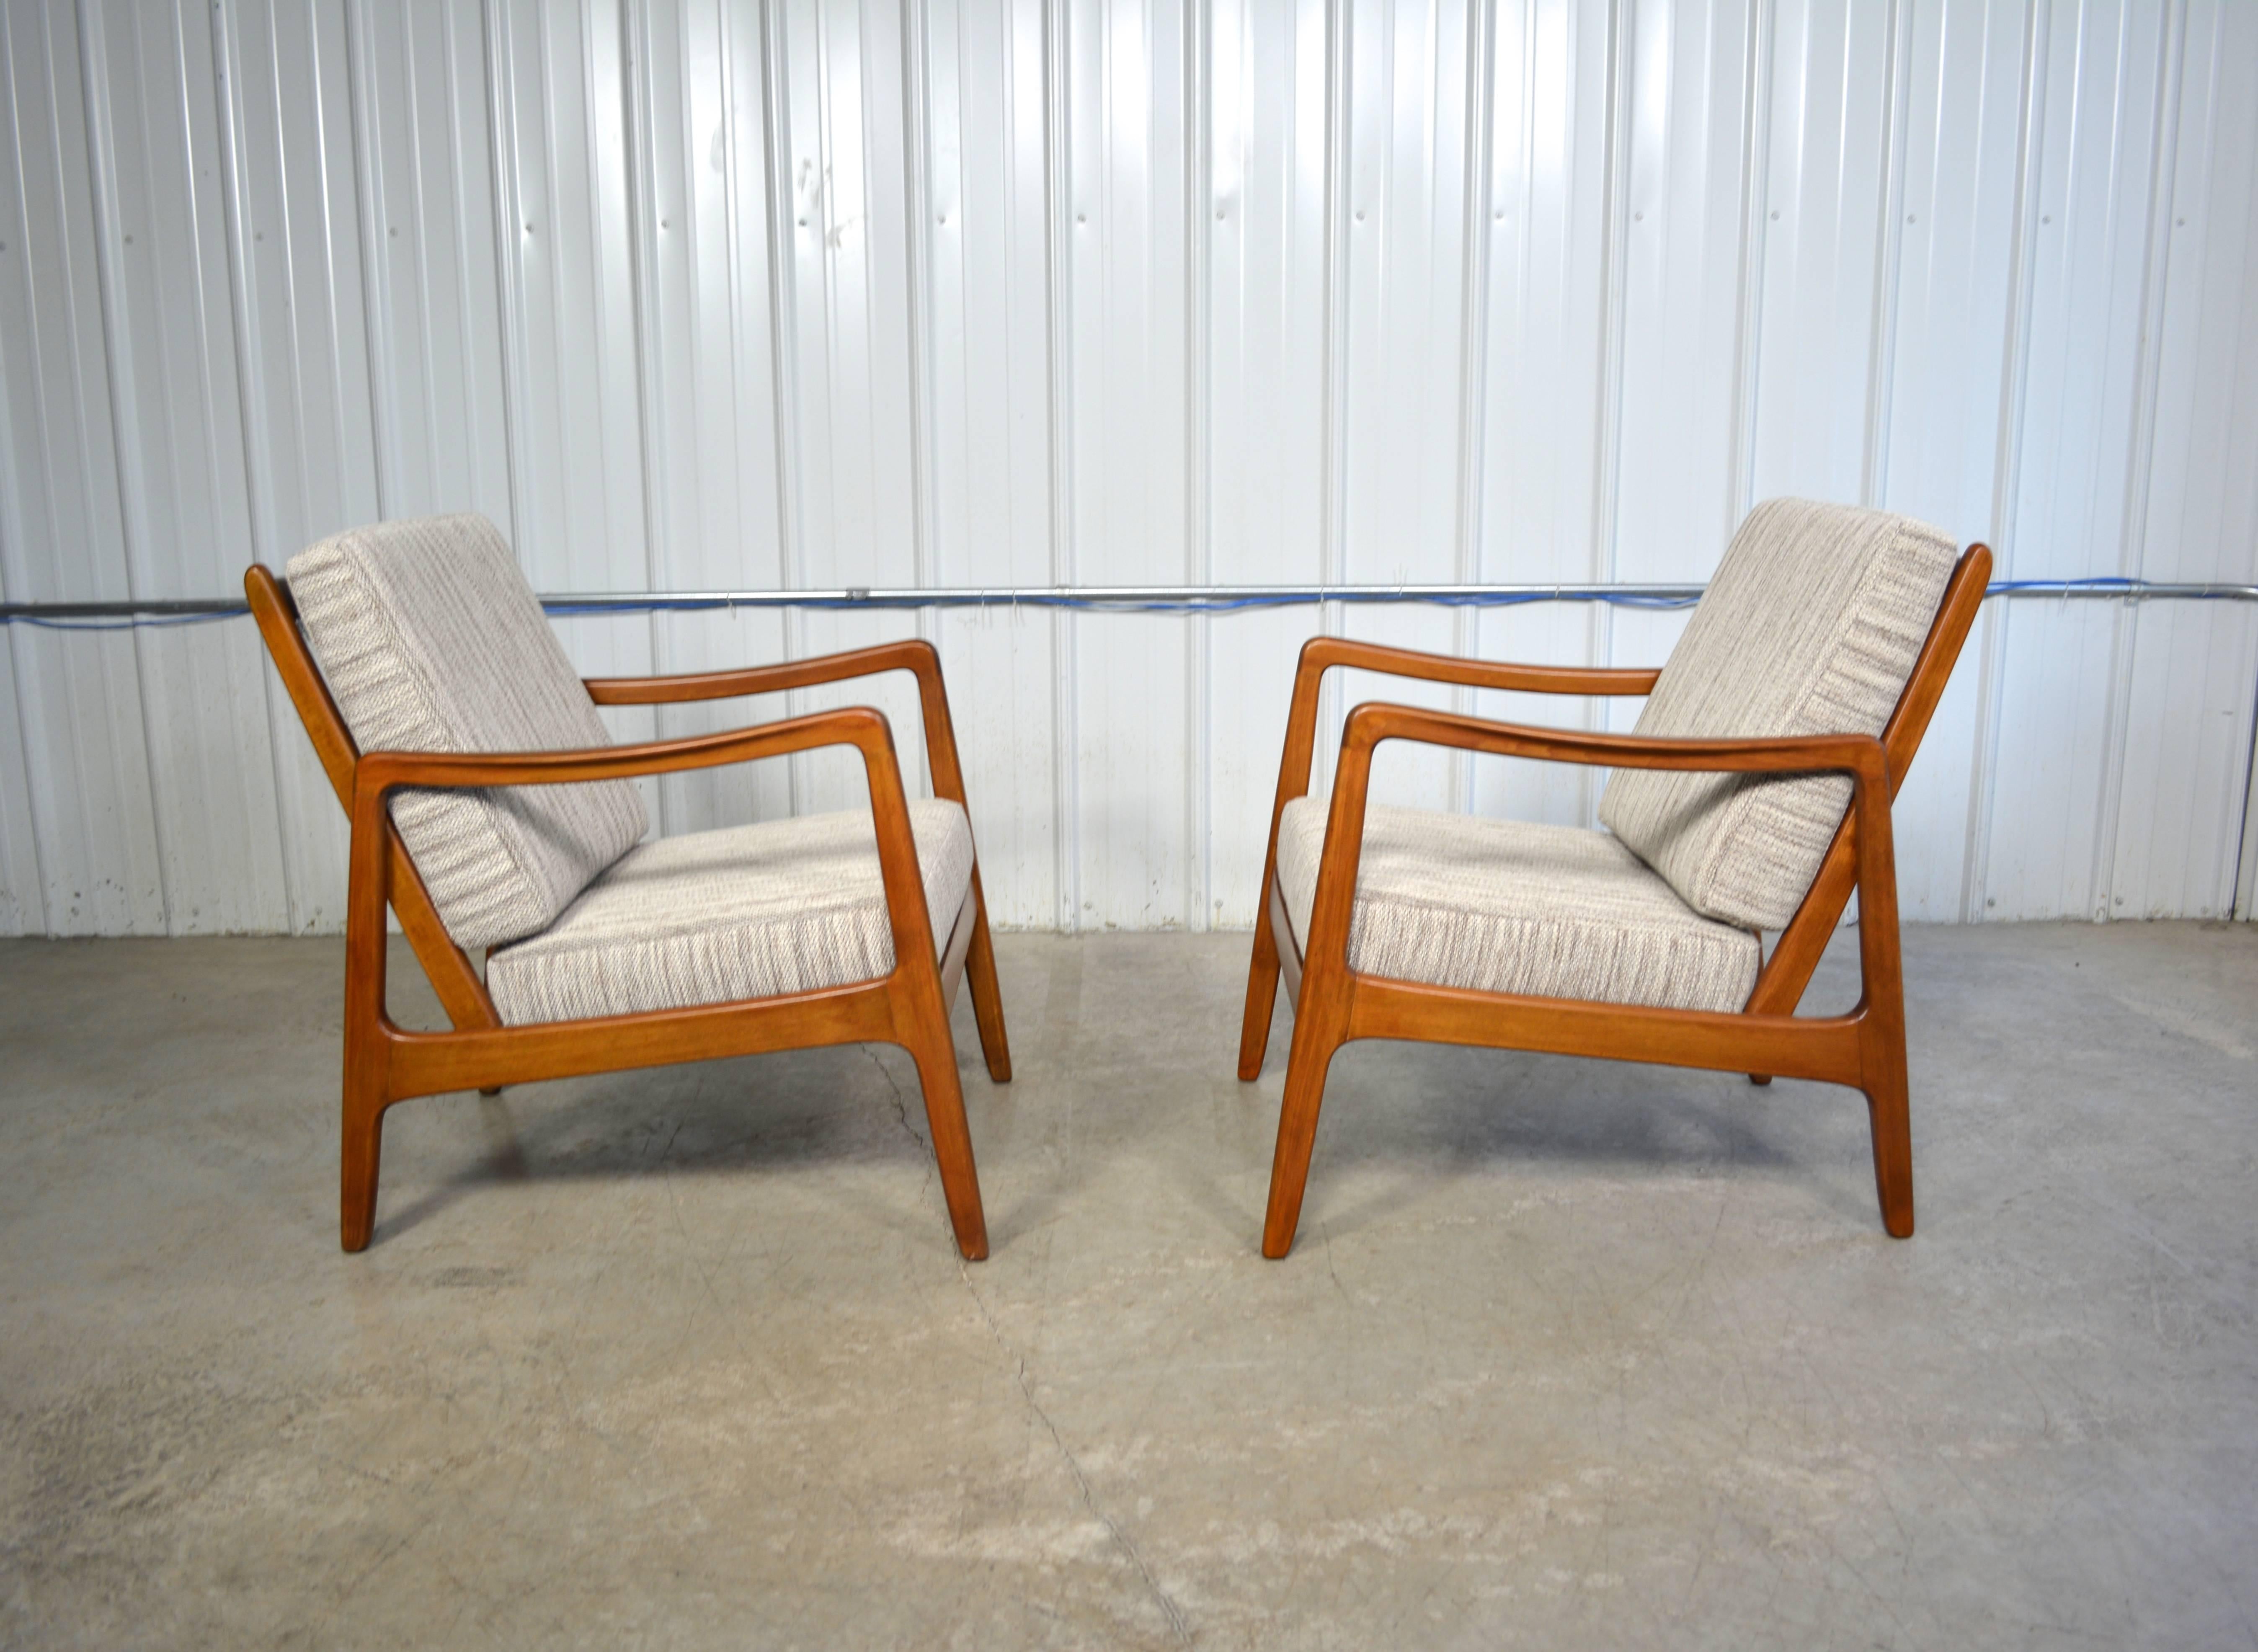 Ole Wanscher Danish Modern Lounge Chairs In Excellent Condition For Sale In Loves Park, IL